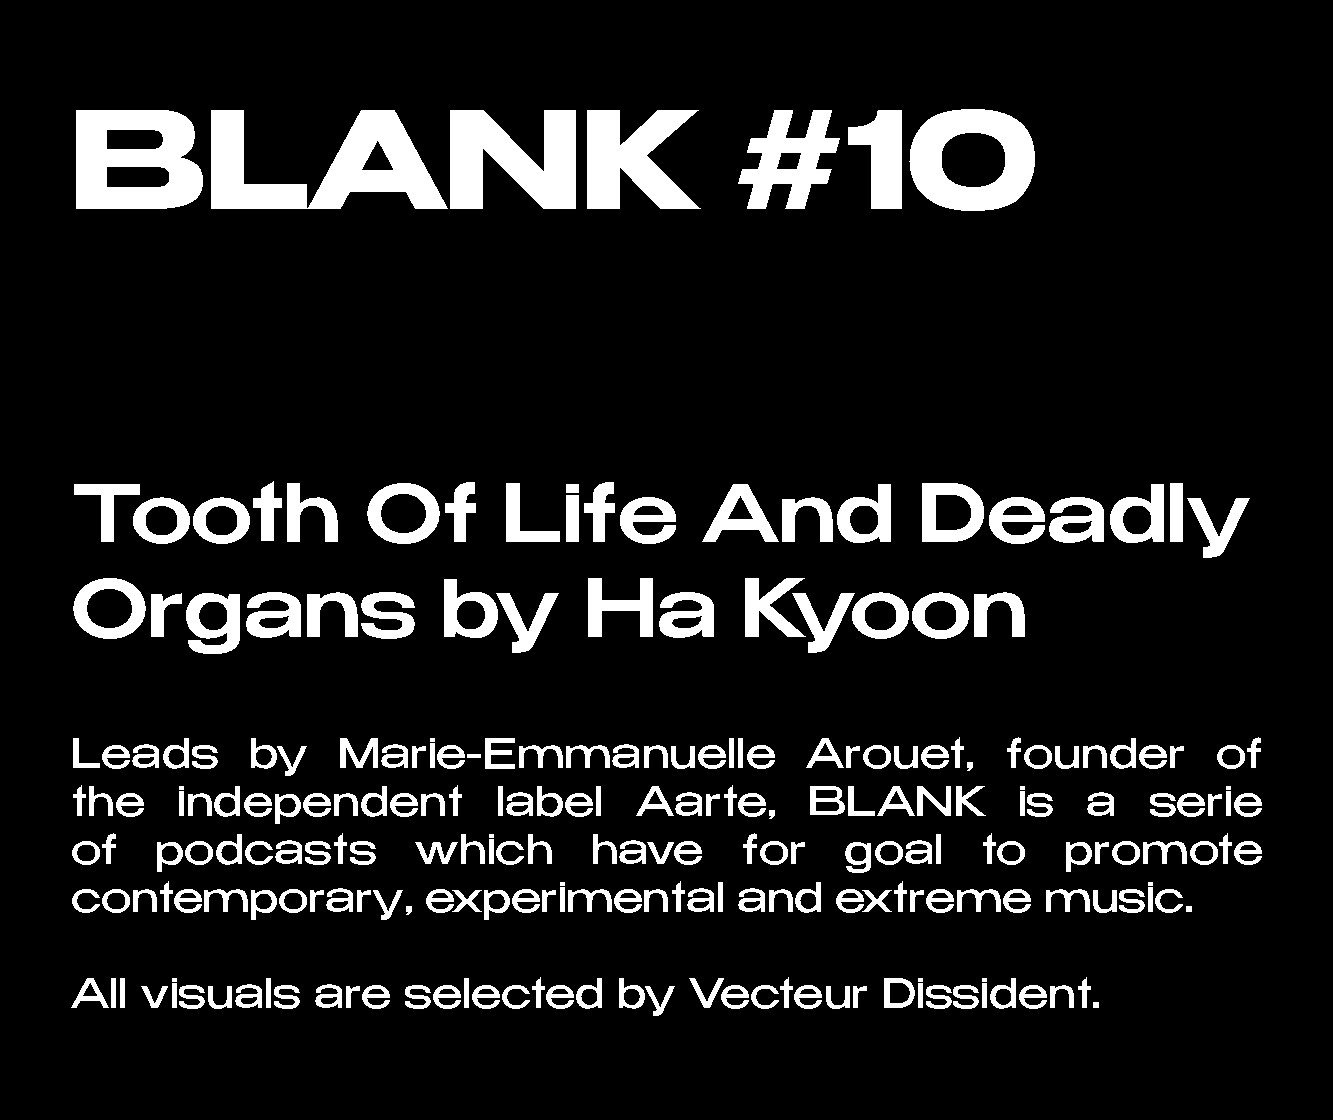 BAD TO THE BONE - BLANK #10 - TOOTH OF LIFE AND DEADLY ORGANS - HA KYOON